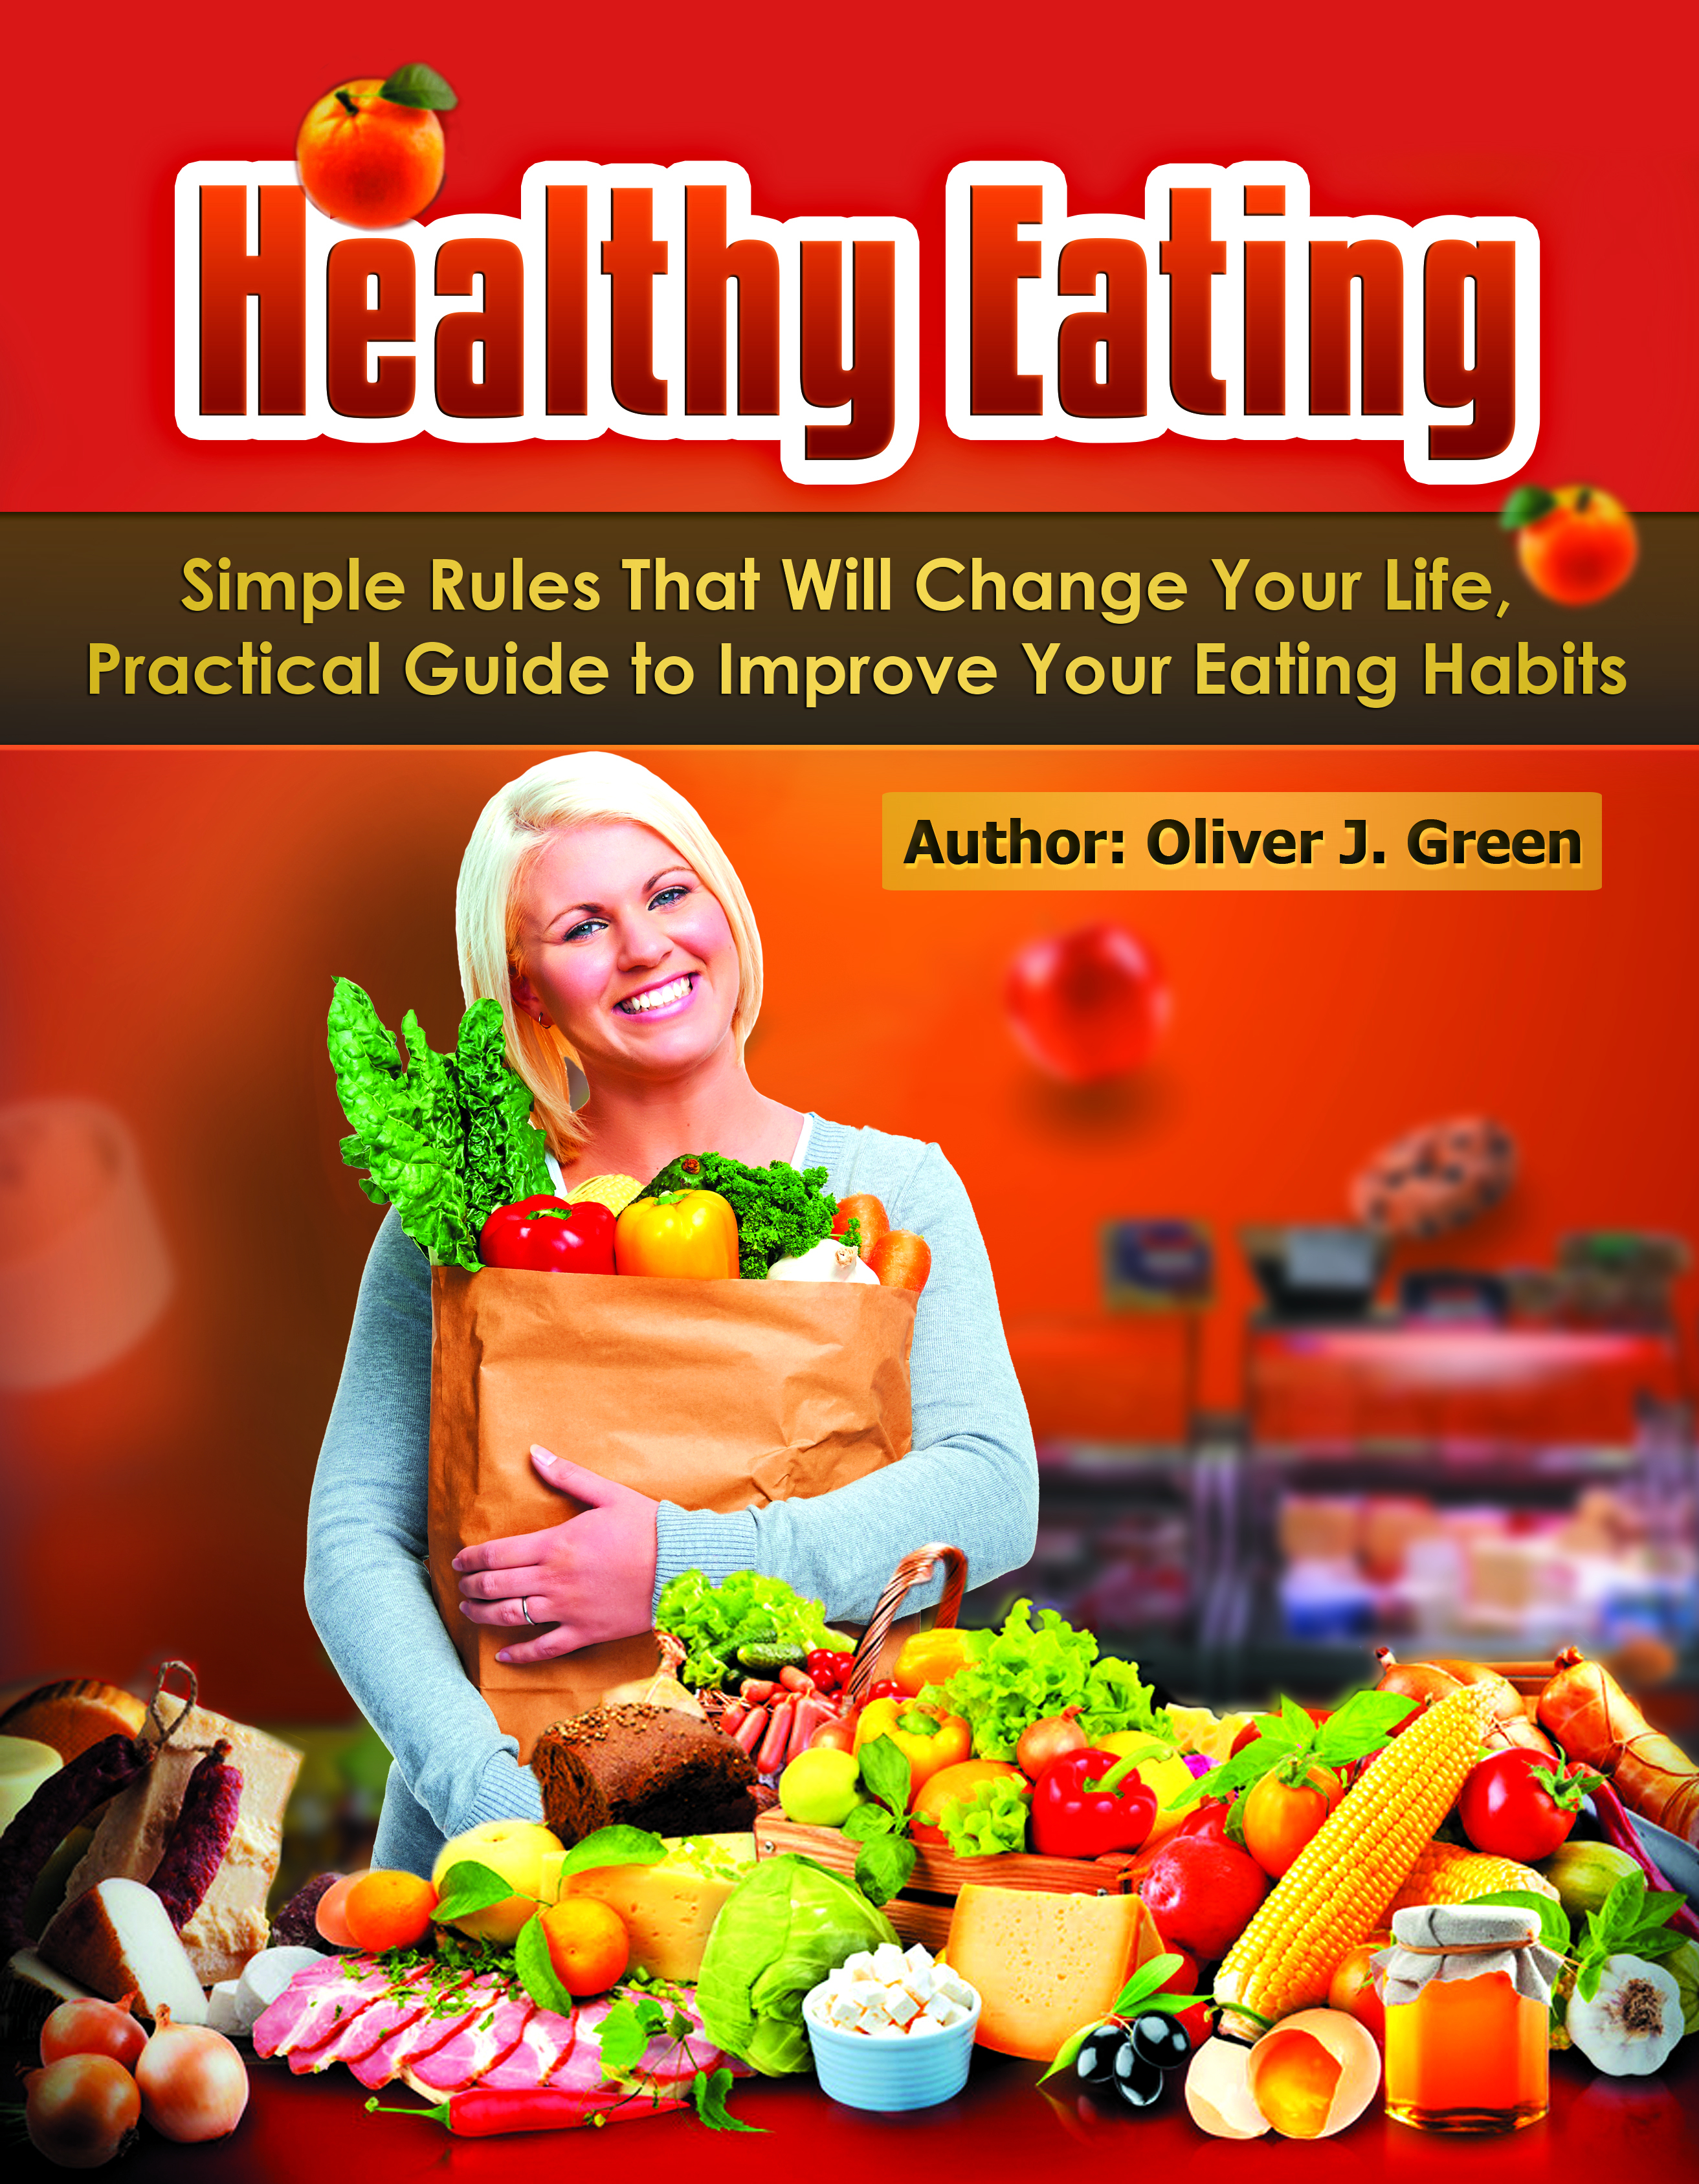 FREE: Healthy Eating: Simple Rules That Will Change Your Life, Practical Guide to Improve Your Eating Habits by Oliver J. Green